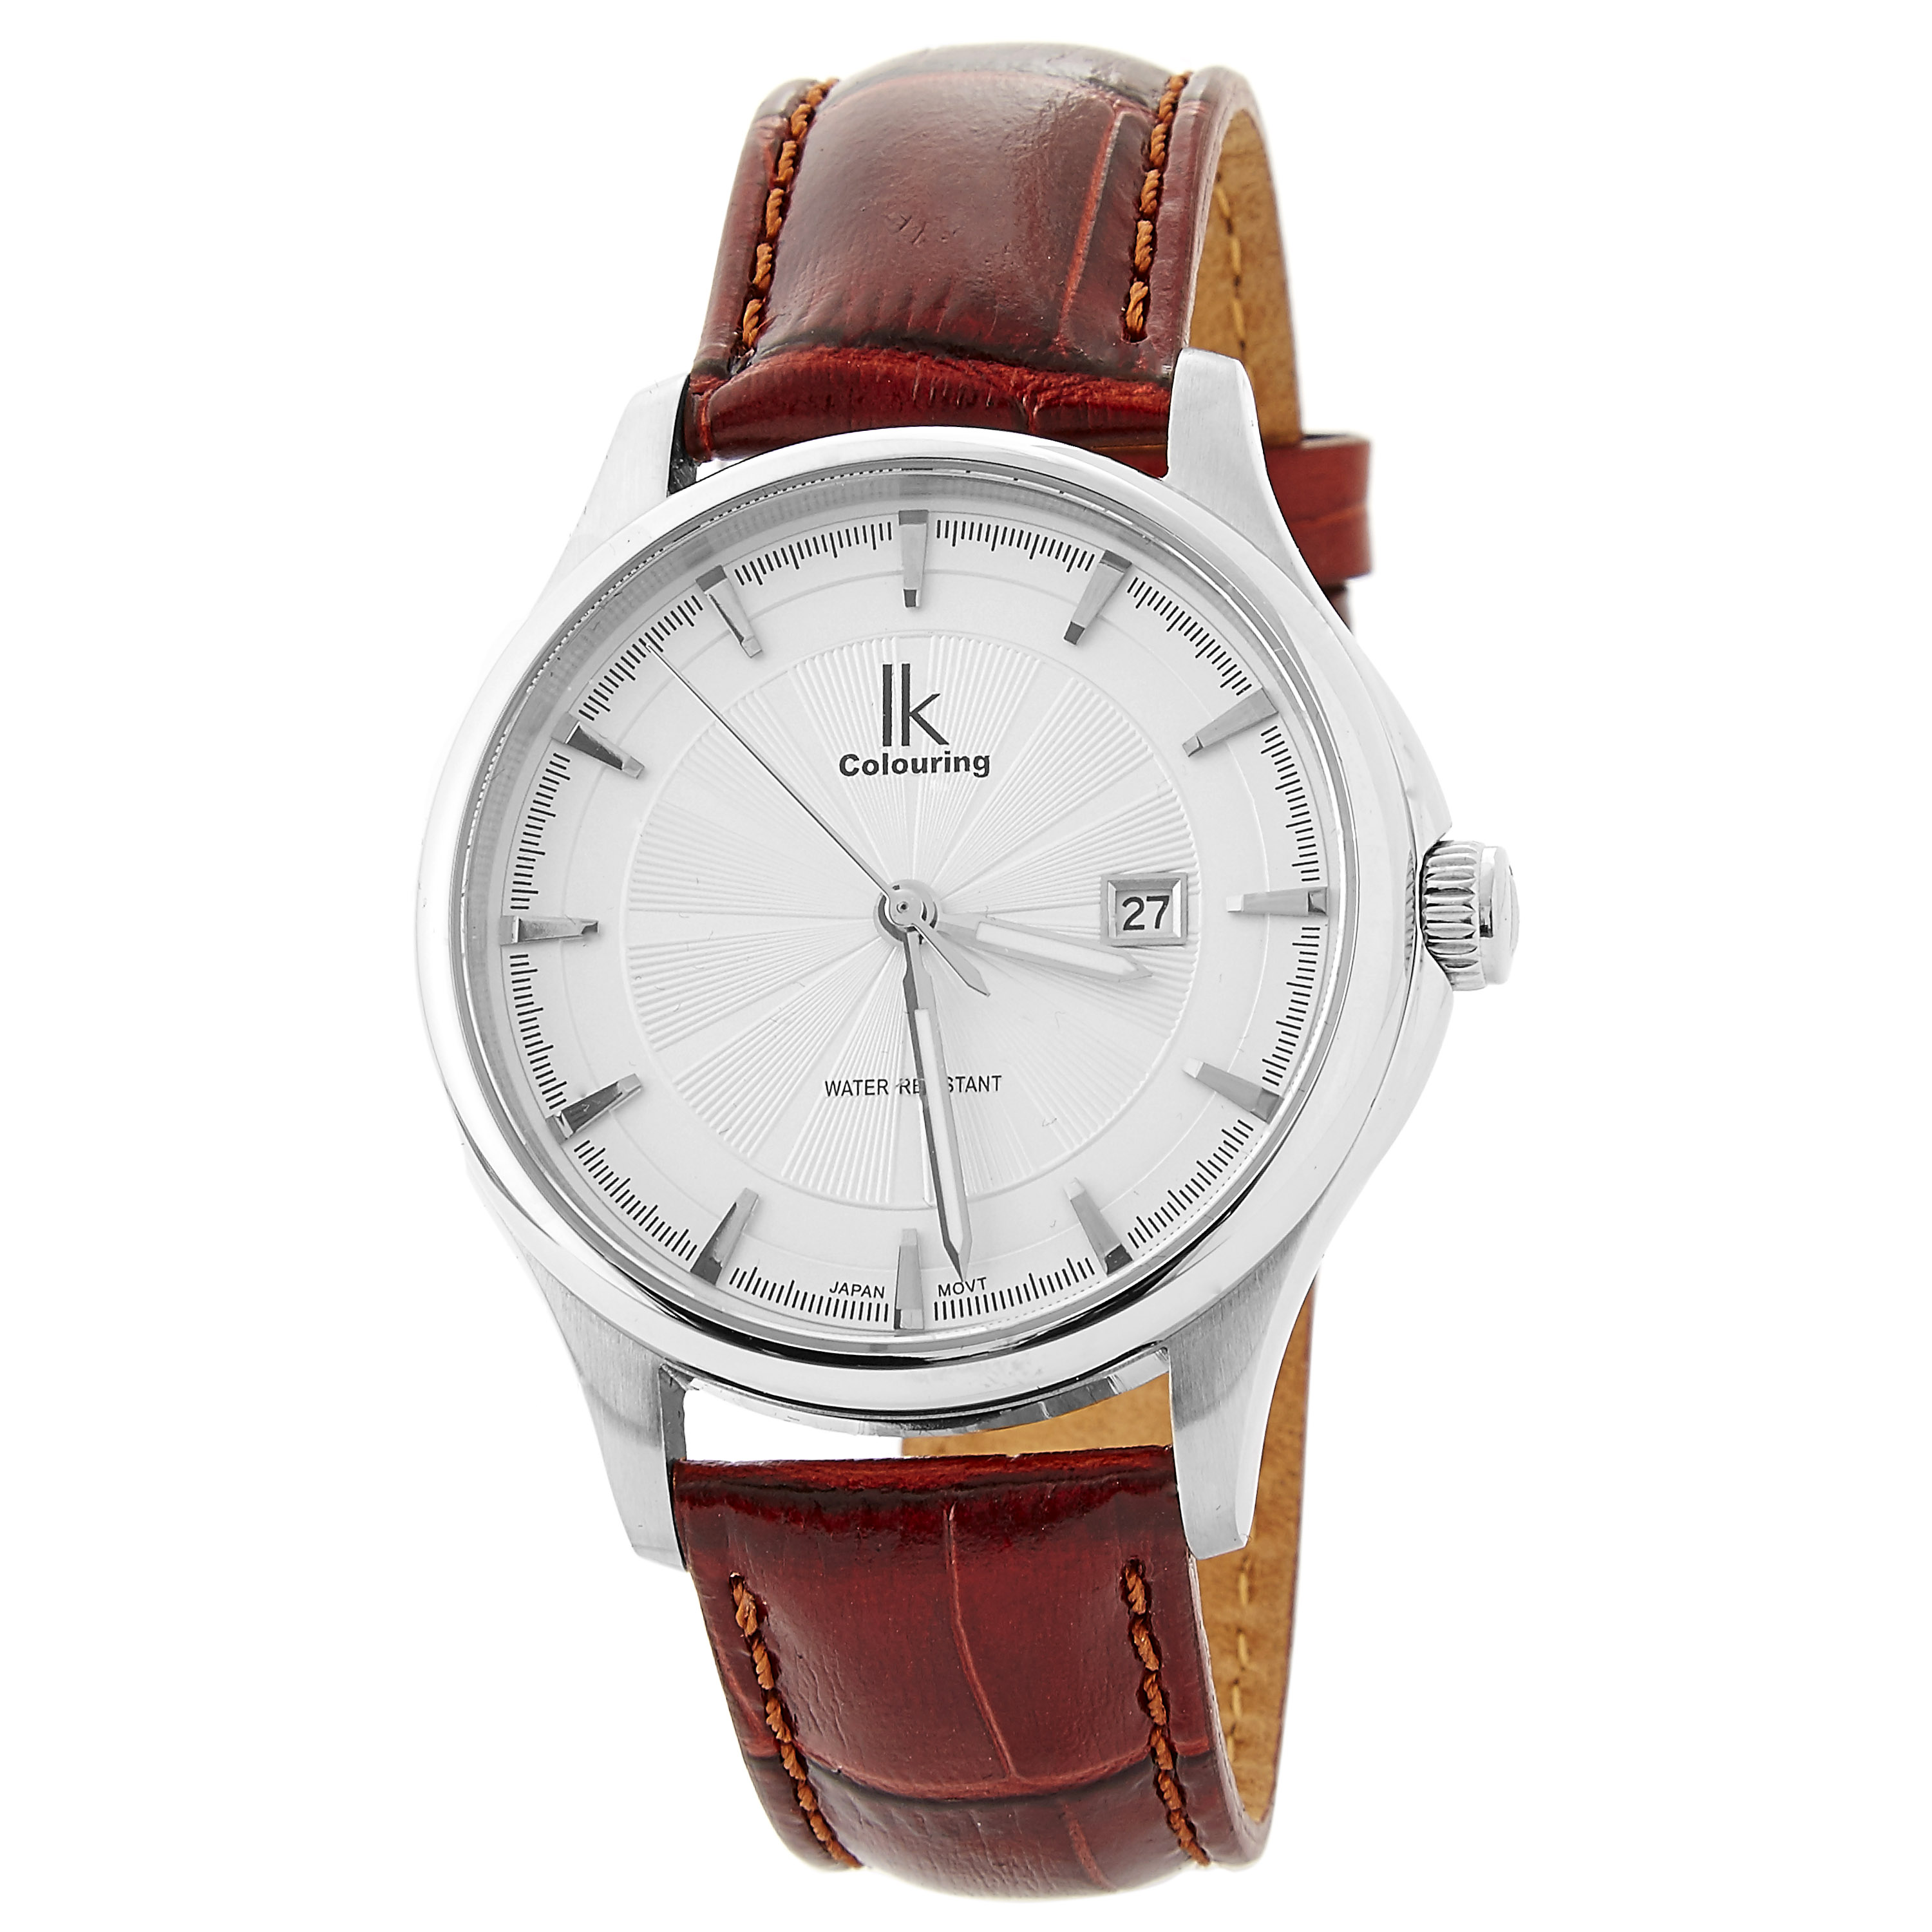 Red Leather Watch | IK Colouring | Free shipping over $75